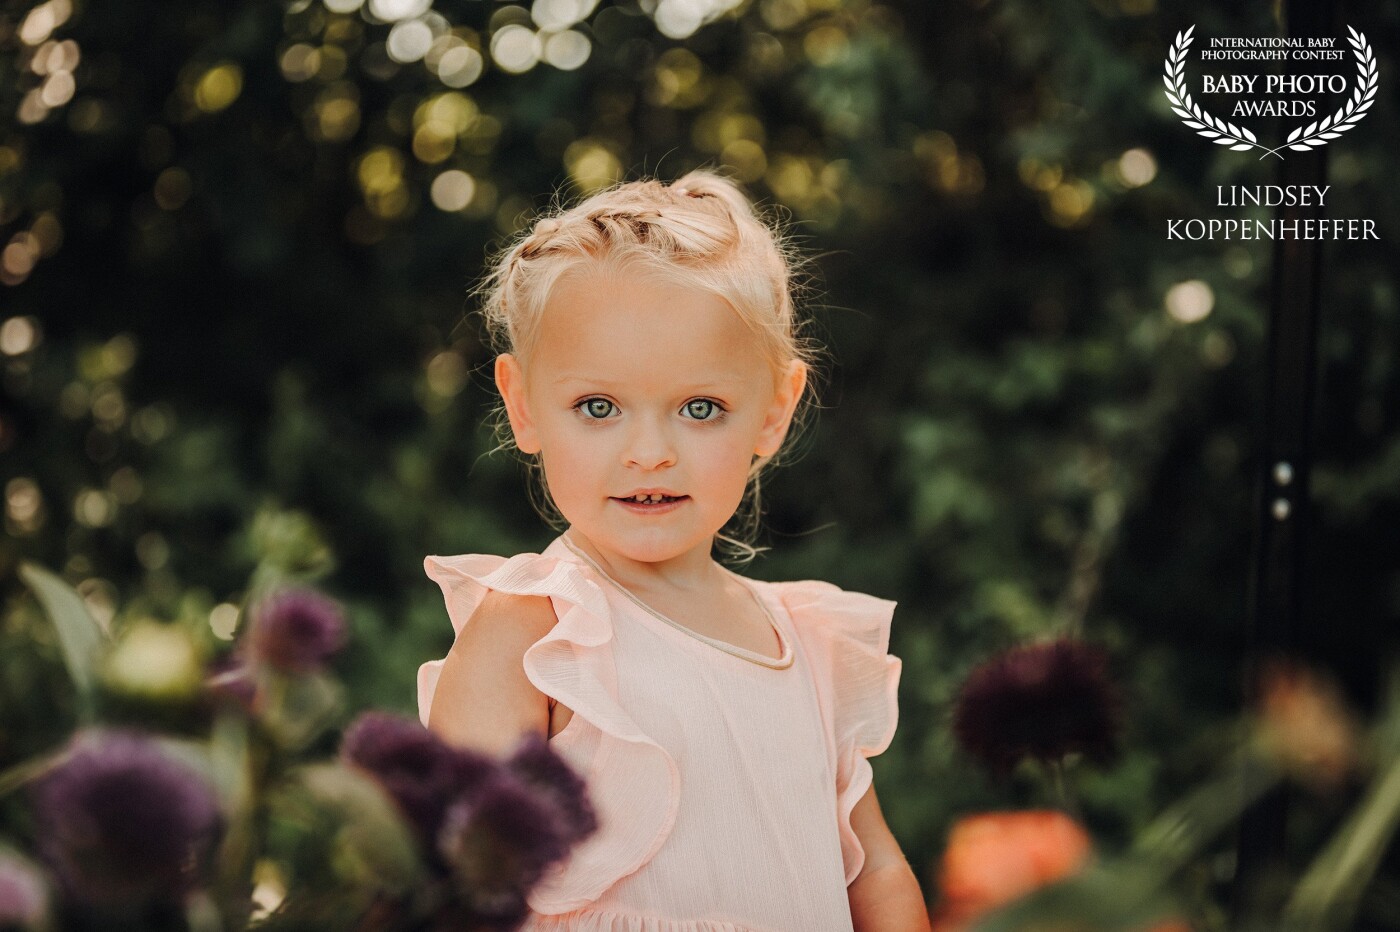 Little Rory had her moment during this photoshoot with her 3 brothers! She's one tough cookie for being able to keep up with all those boys. She is just as beautiful inside as she is on the out and I just adore my sessions with her.